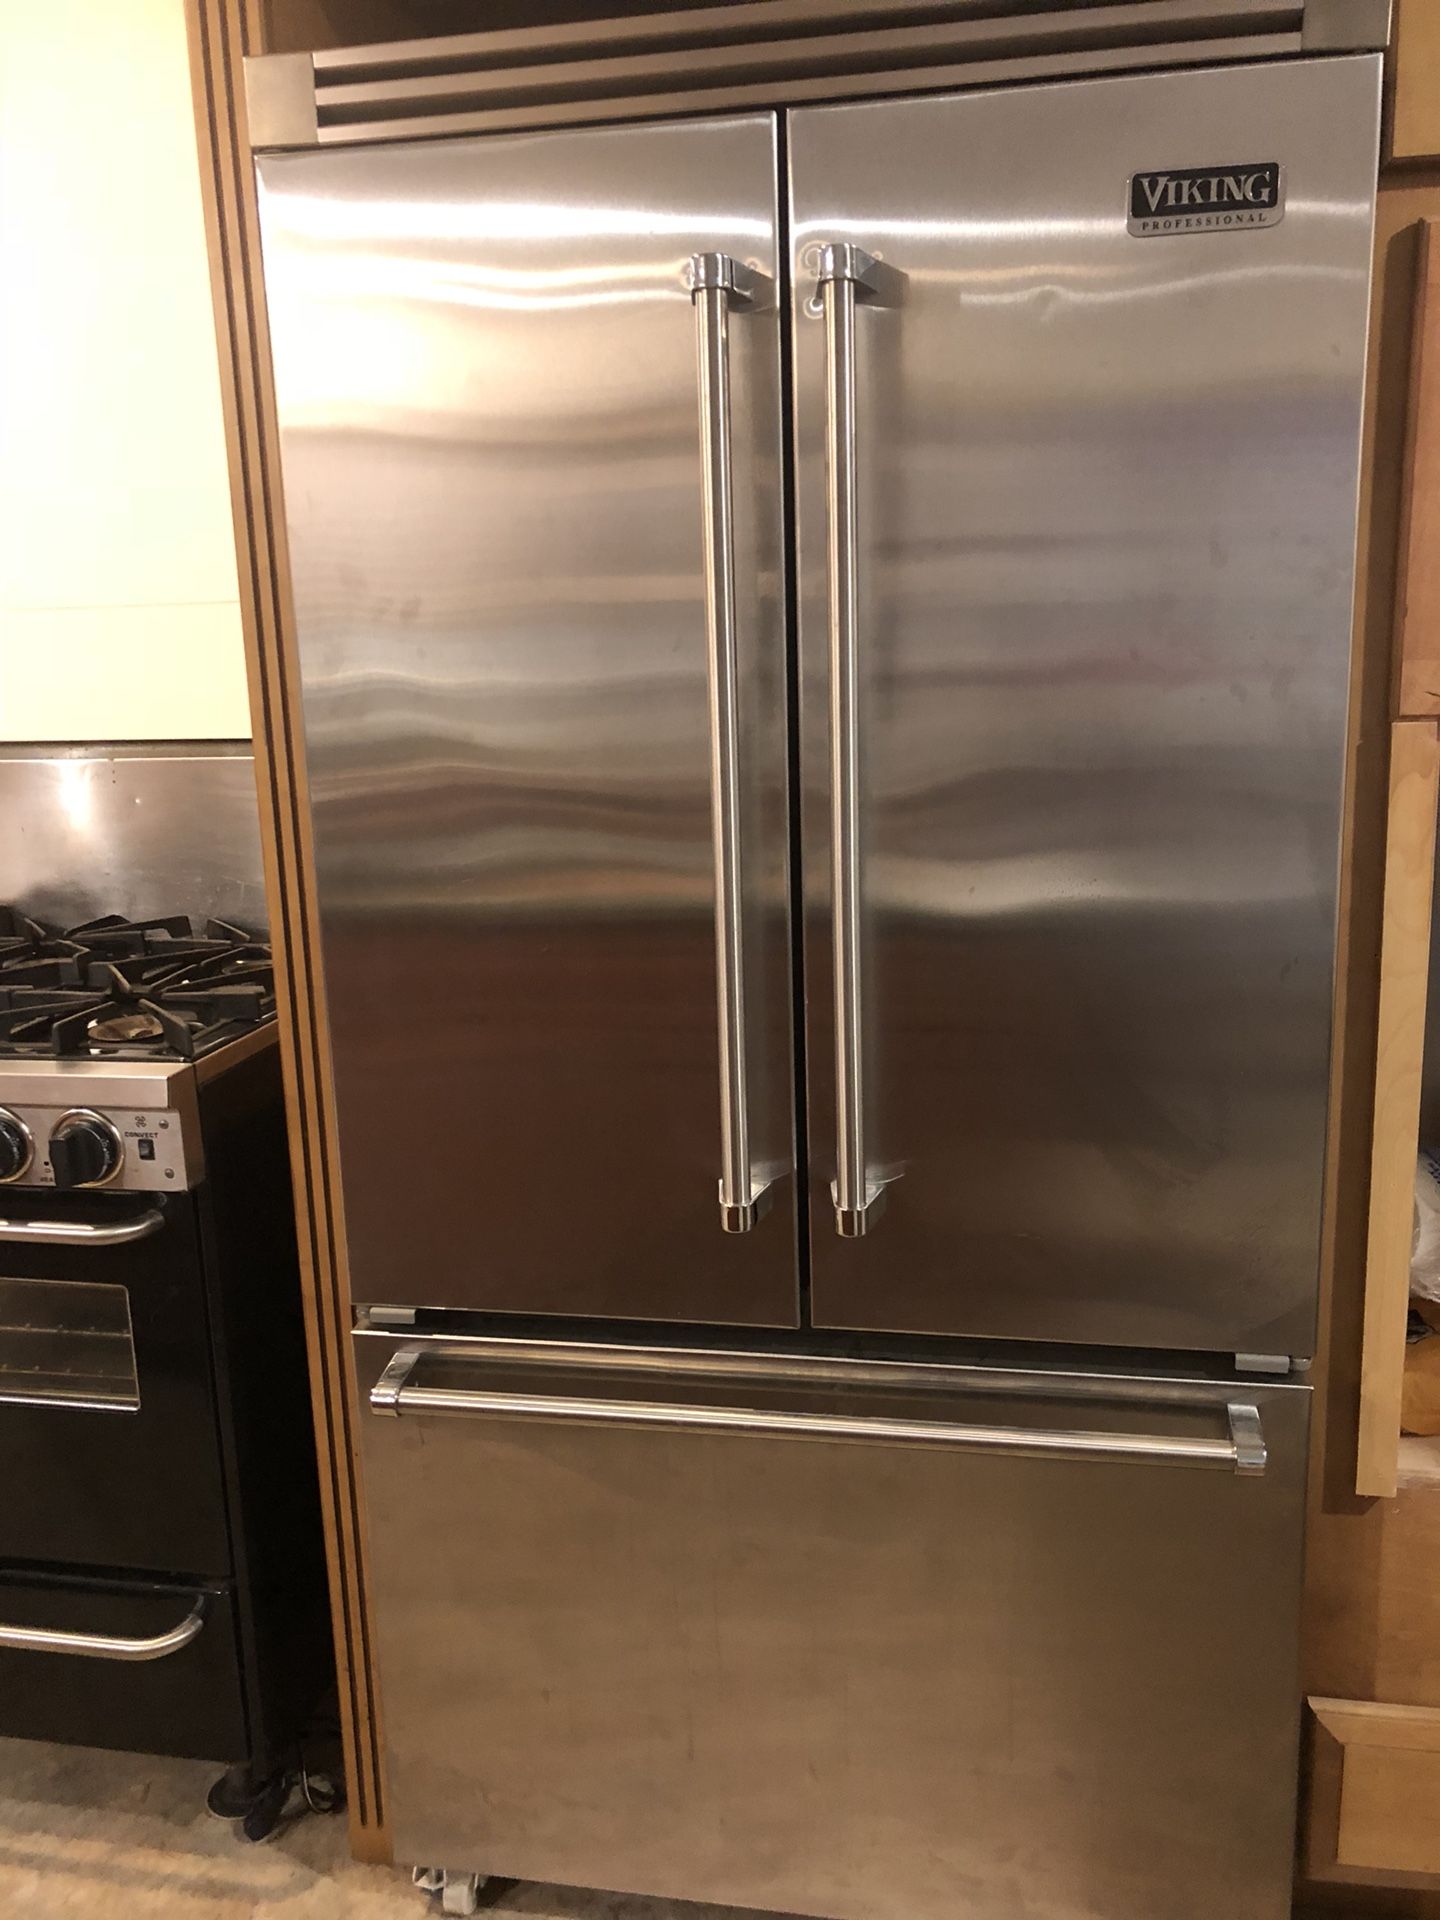 Viking Refrigerator (Not free/Offer requested)